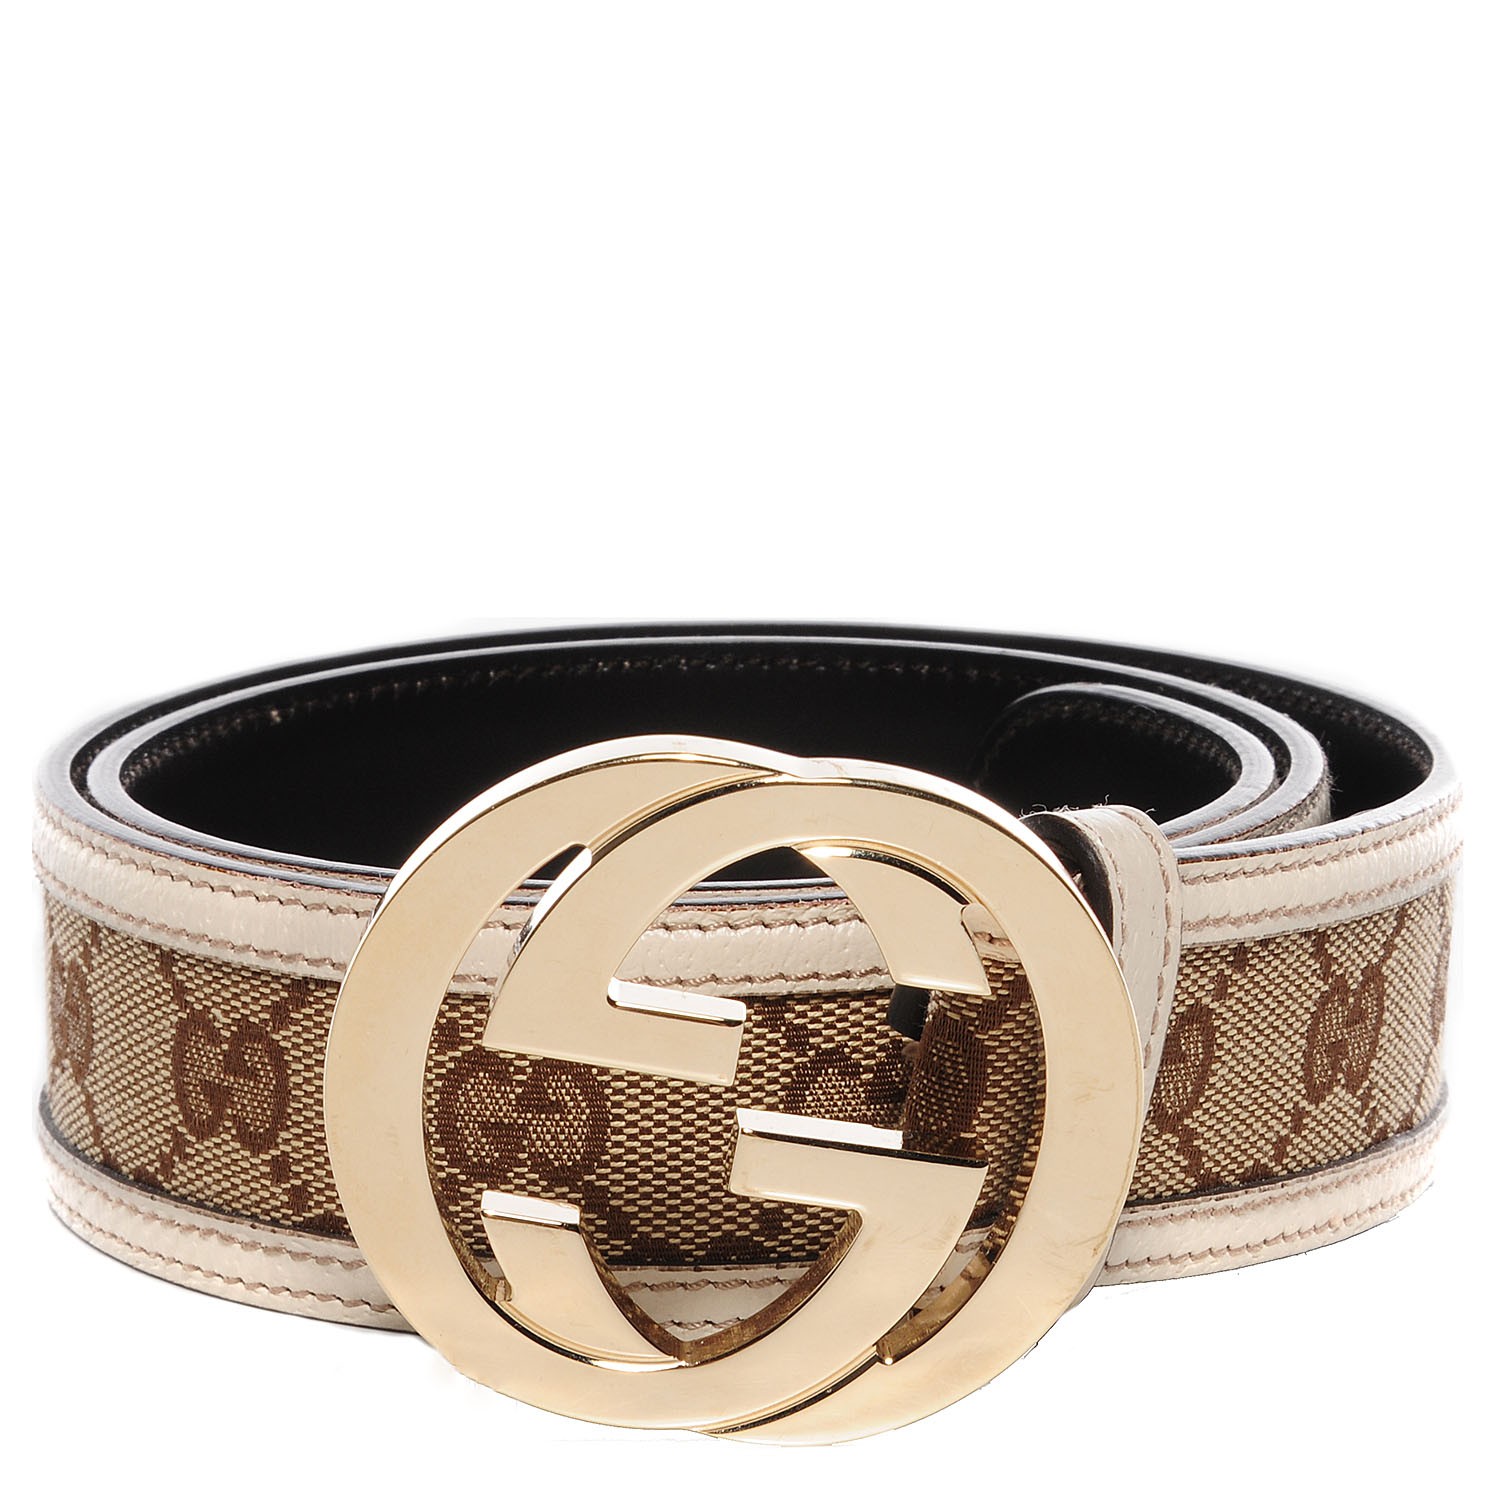 gucci belt white and gold